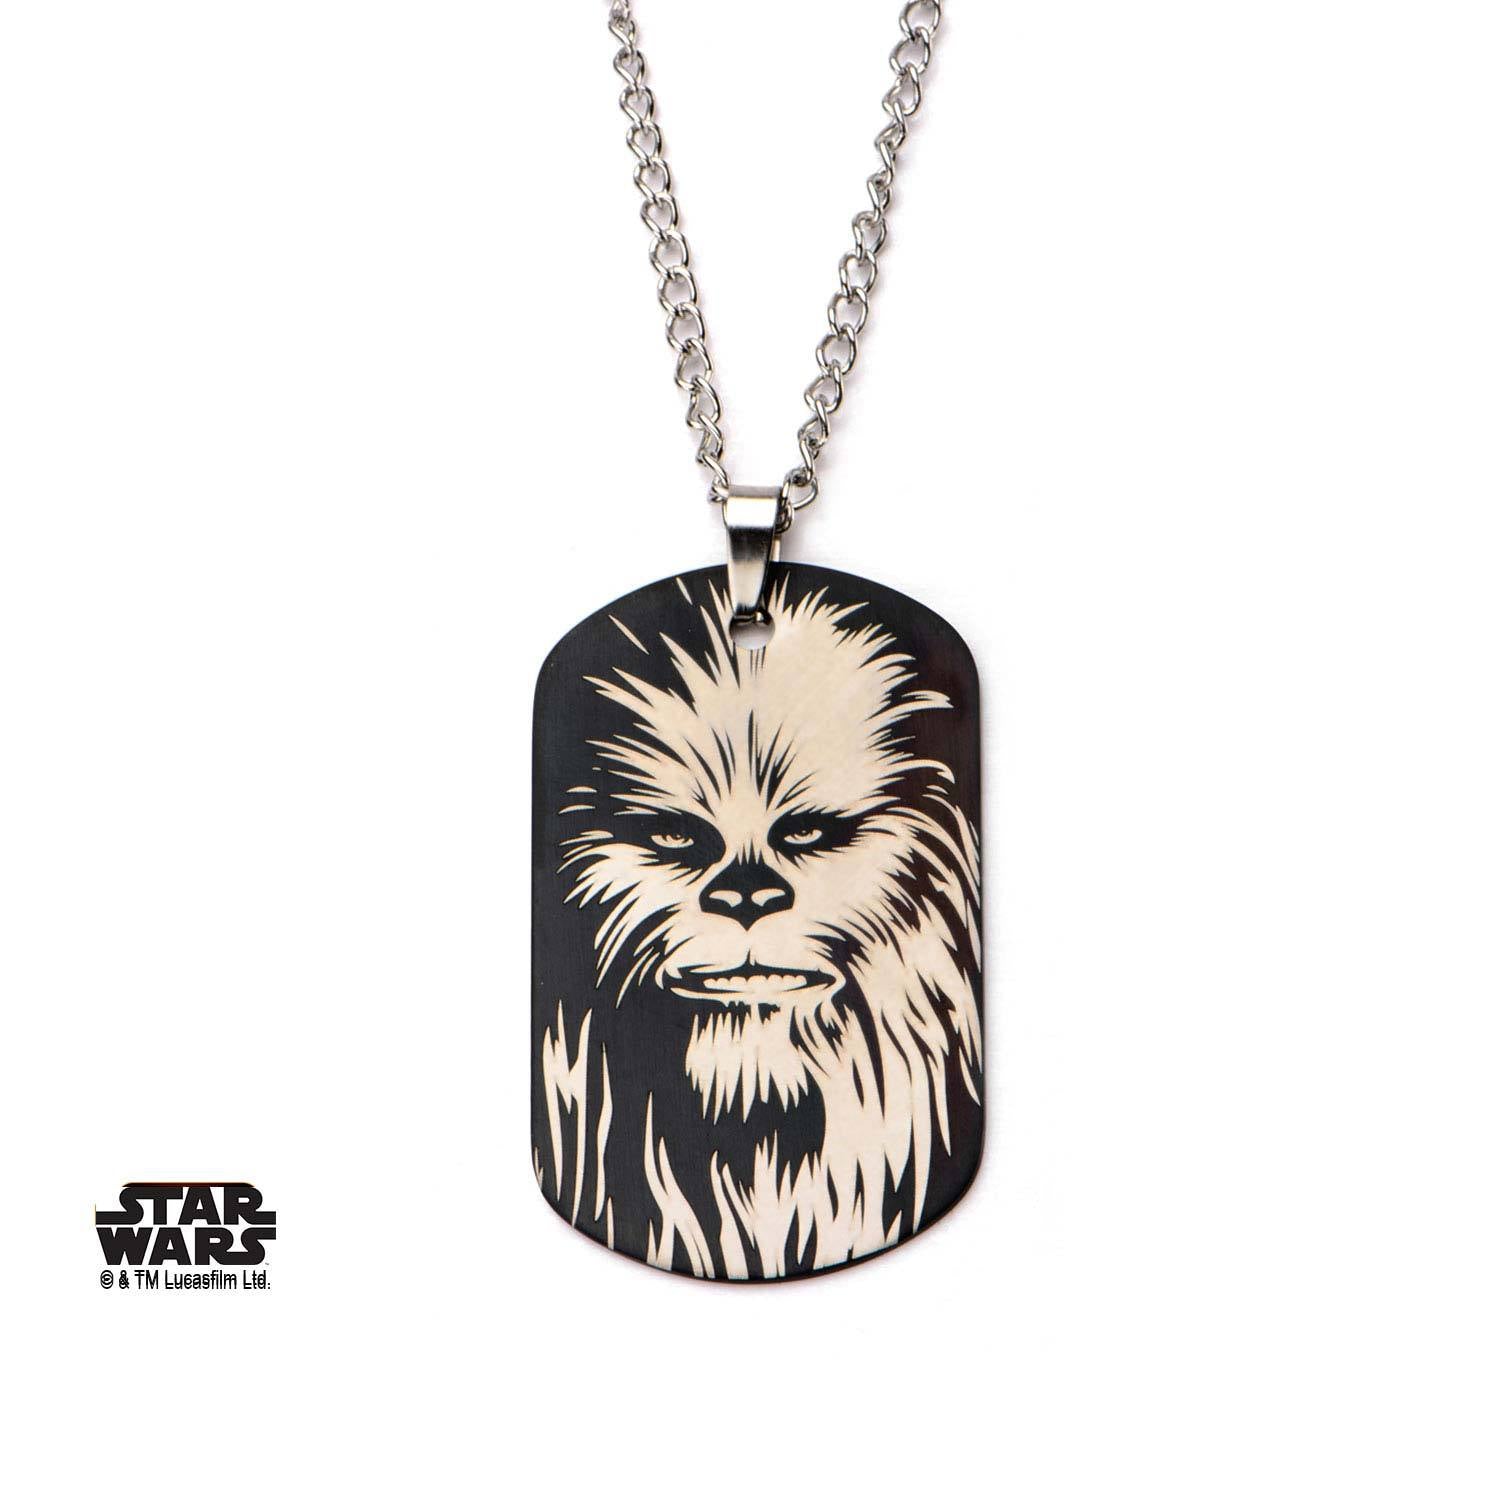 Star Wars Chewbacca Face Dog Tag Pendant Necklace  